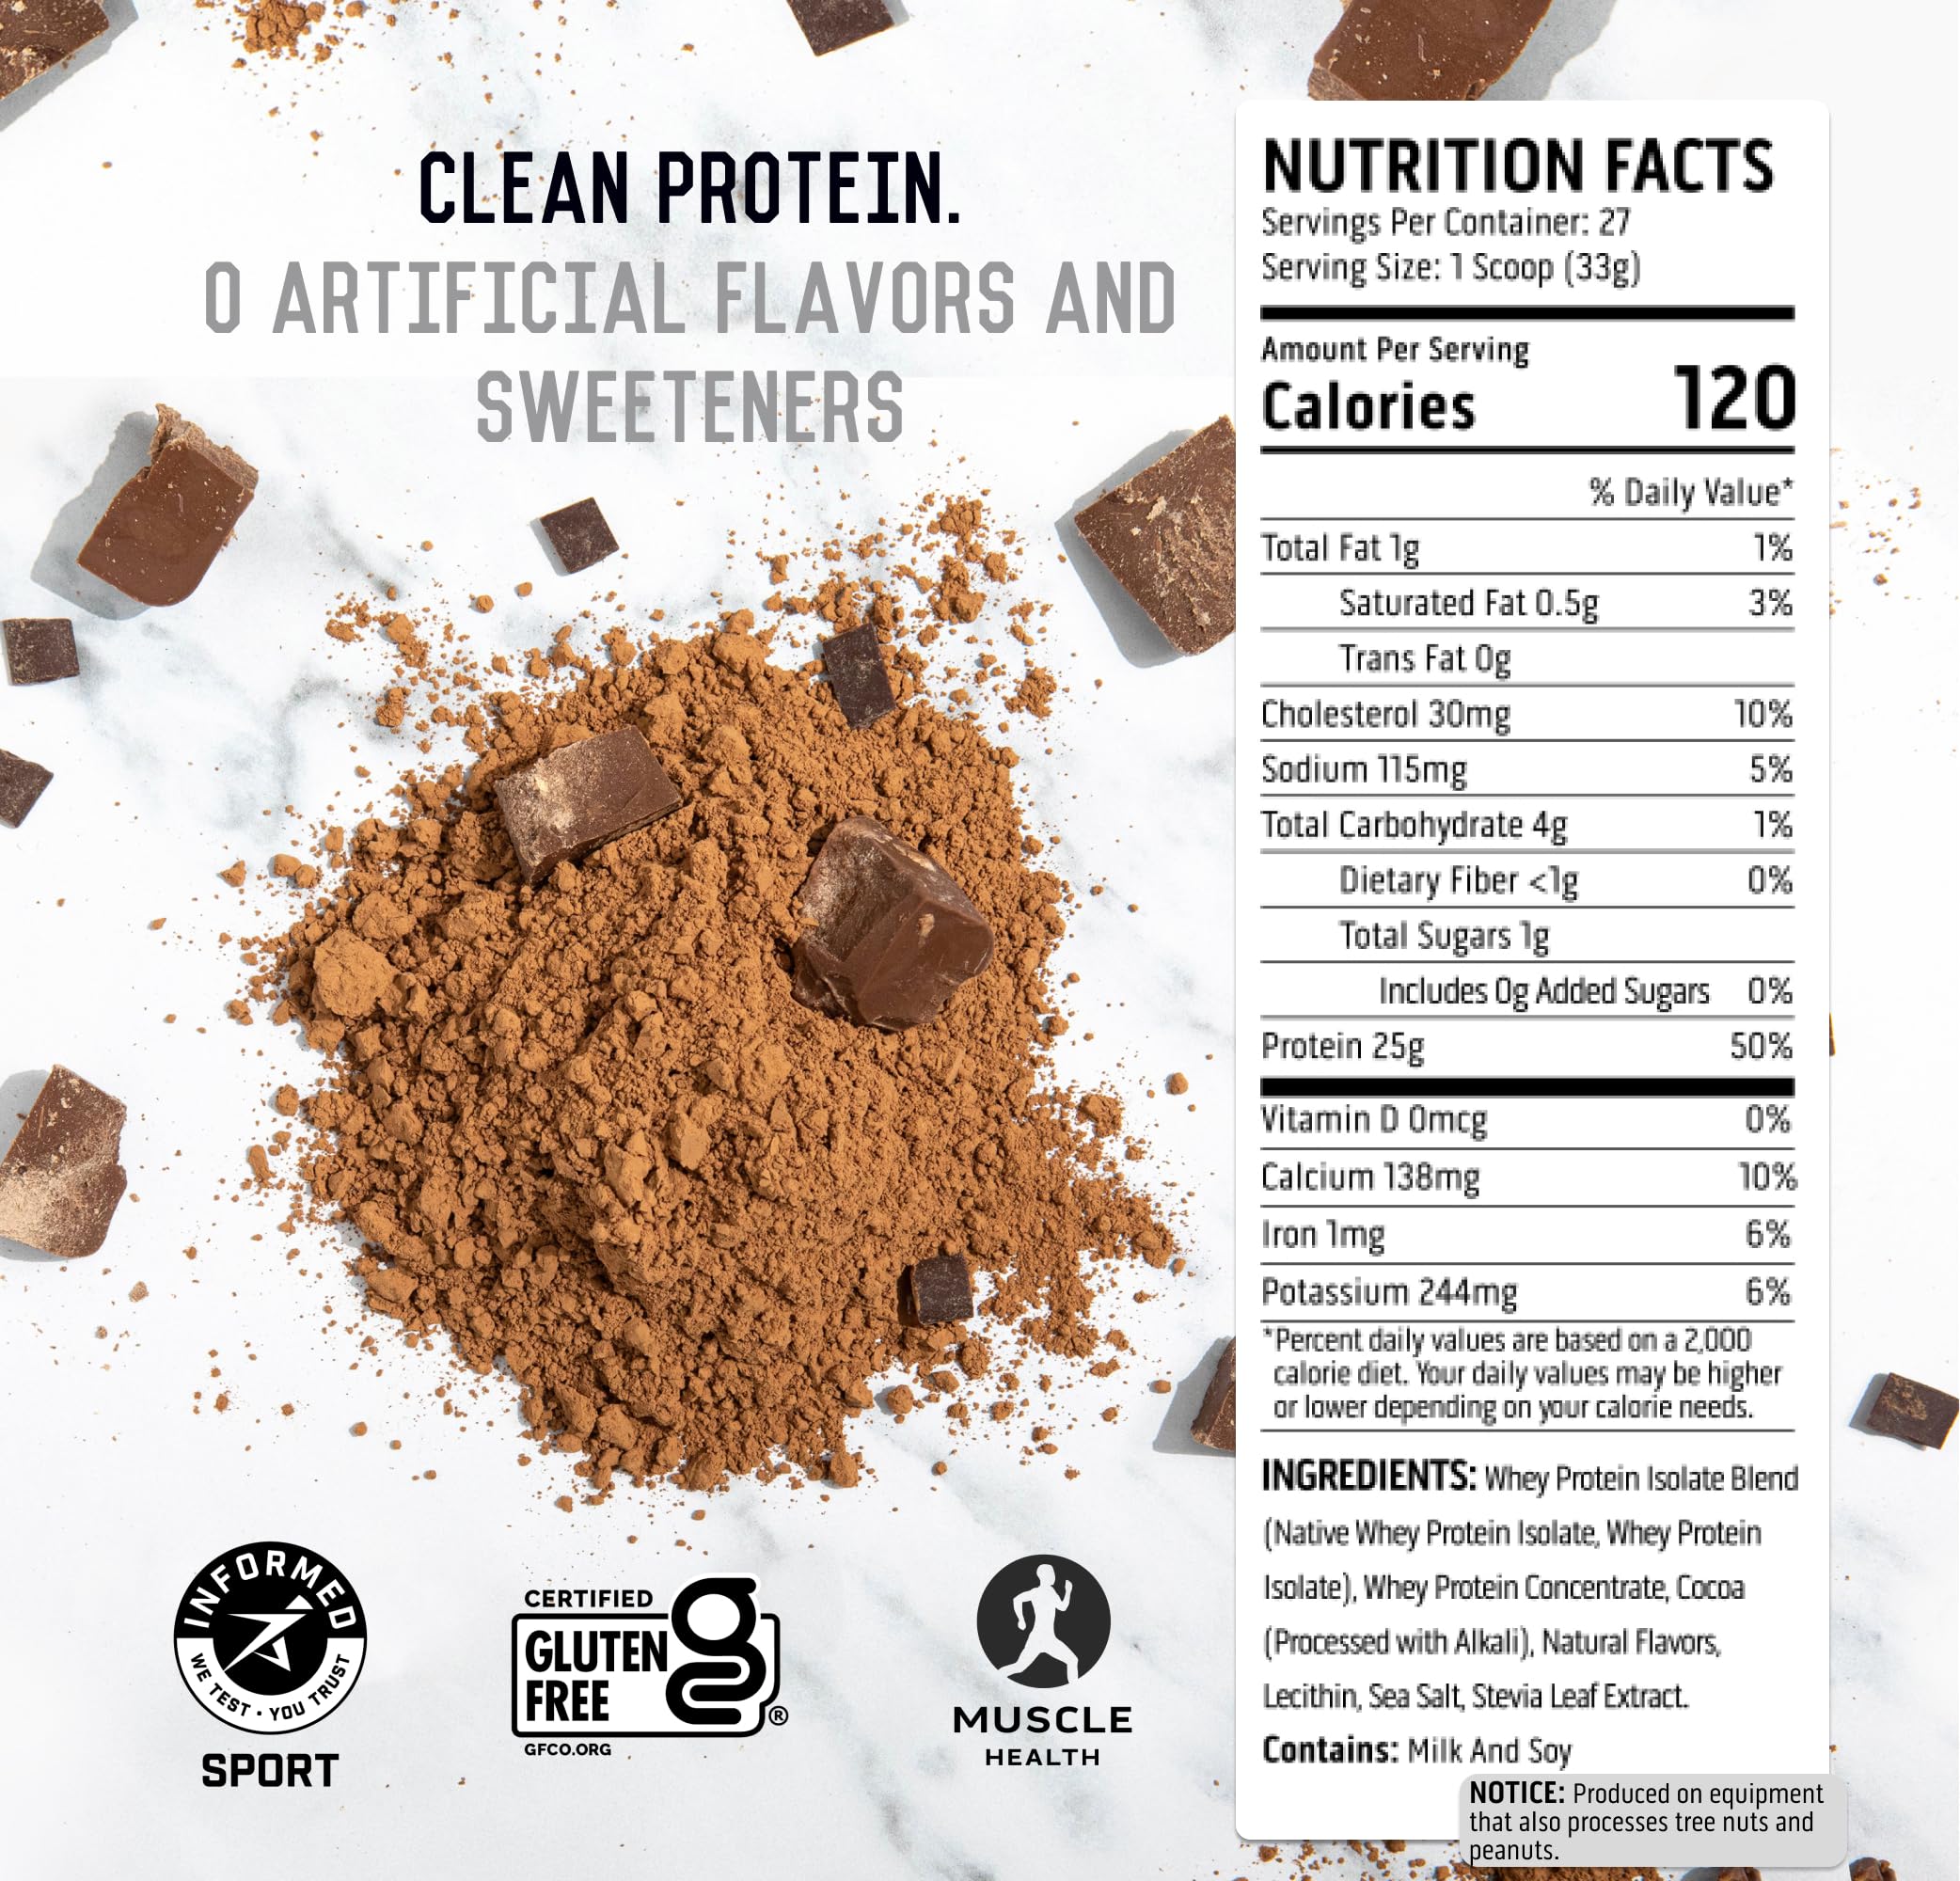 Ascent 100% Whey Protein Powder - Post Workout Whey Protein Isolate, Zero Artificial Flavors & Sweeteners, Gluten Free, 5.7g BCAA, 2.7g Leucine, Essential Amino Acids, Chocolate 2 lb